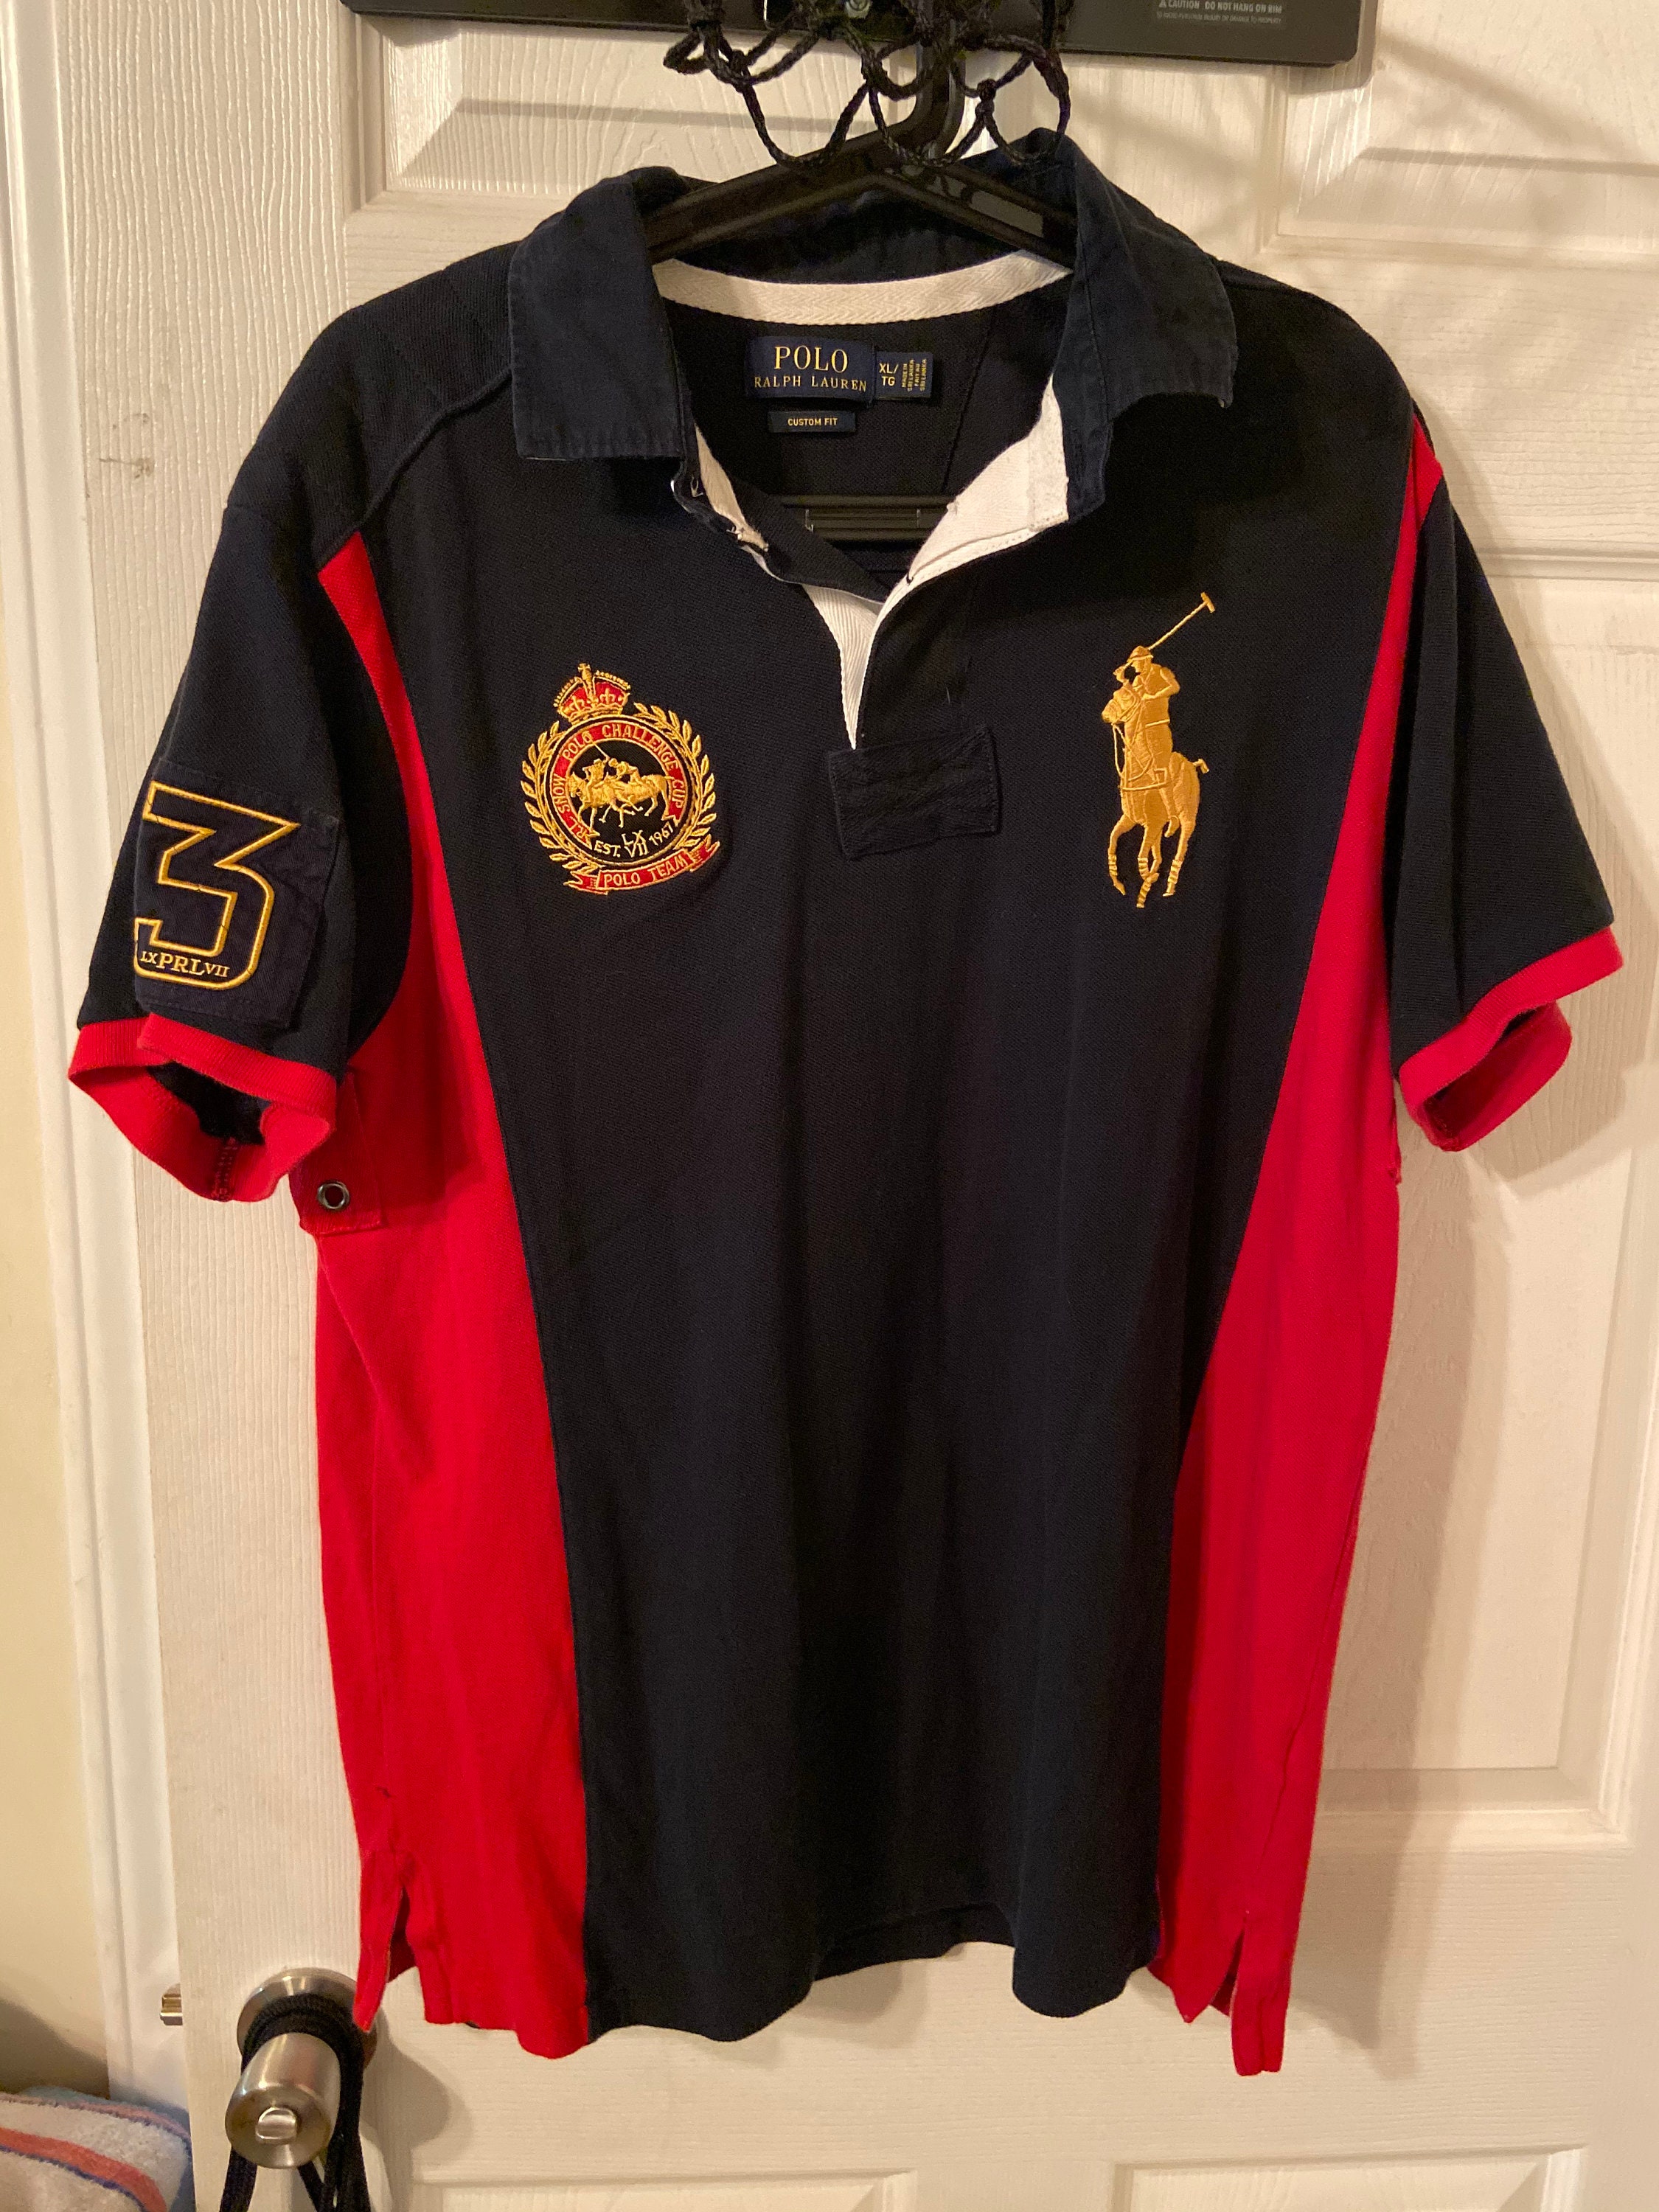 Men's Polo Shirts & T-Shirts from RM Williams & Ralph Lauren